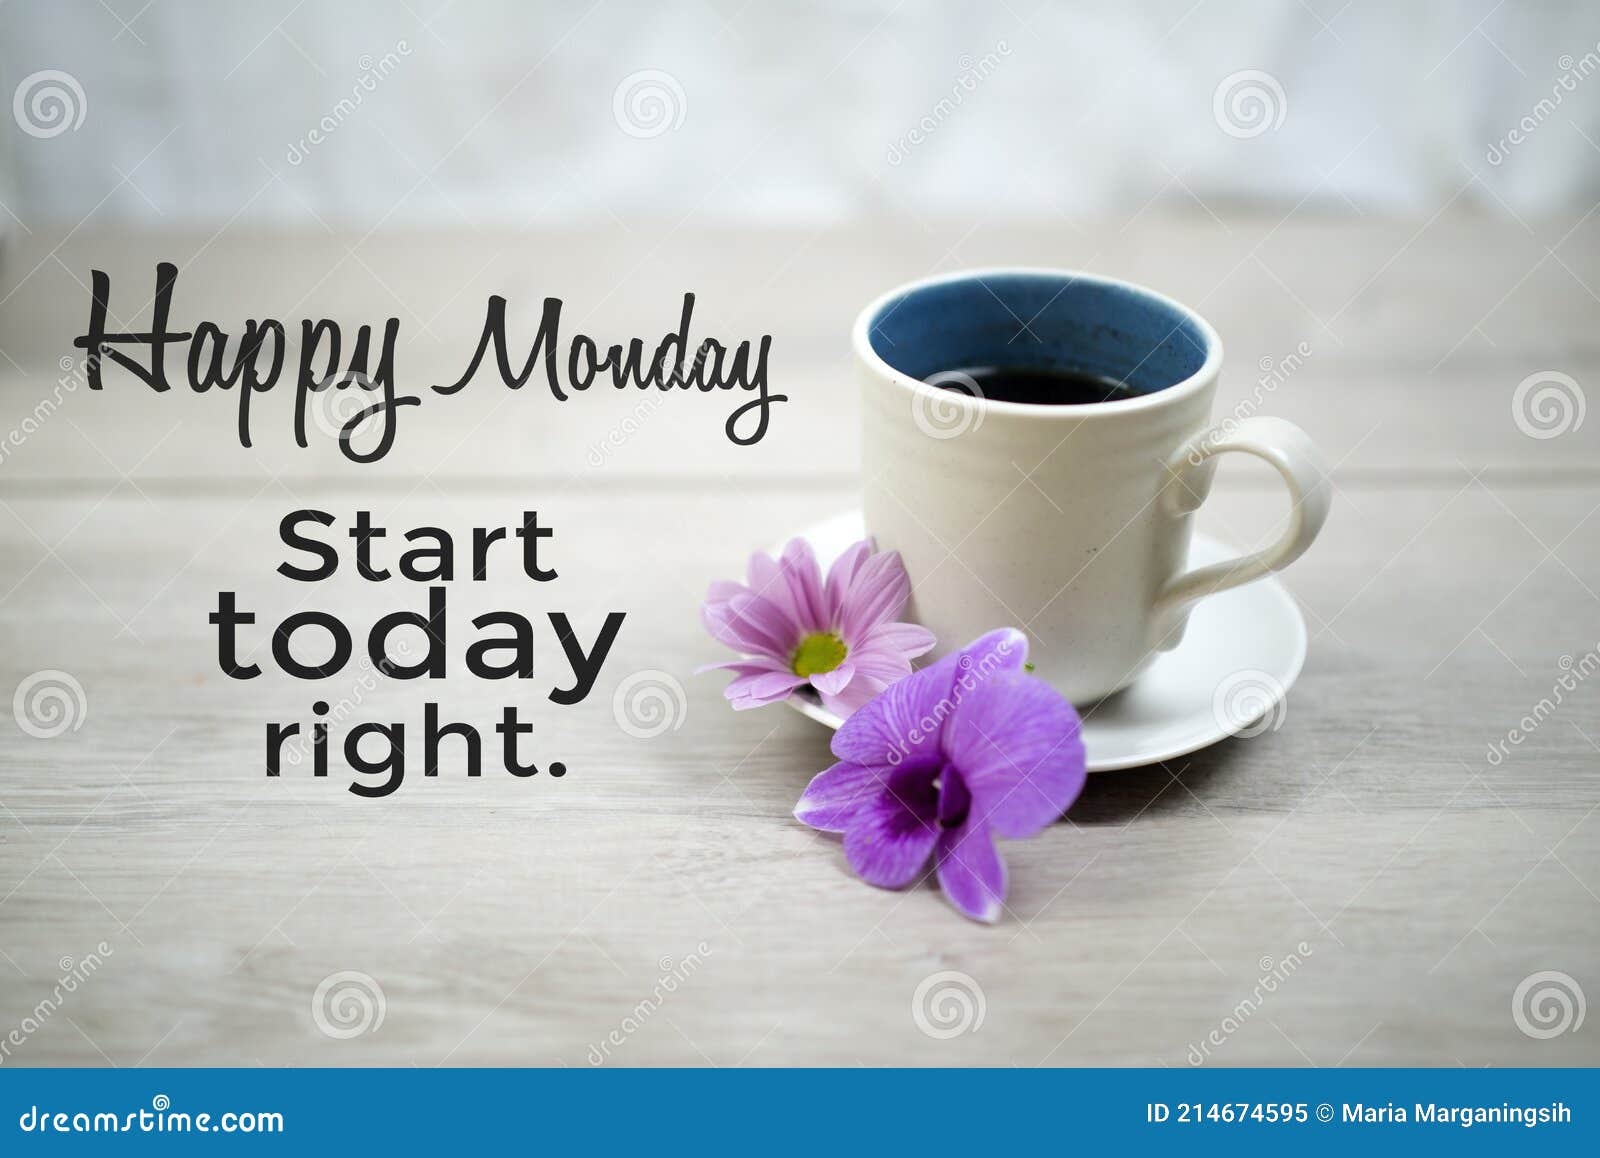 Inspirational Motivational Quote - Happy Monday. Start Today Right. with  Cup of Morning Coffee and Purple Flowers on White Table. Stock Image -  Image of light, happymonday: 214674595